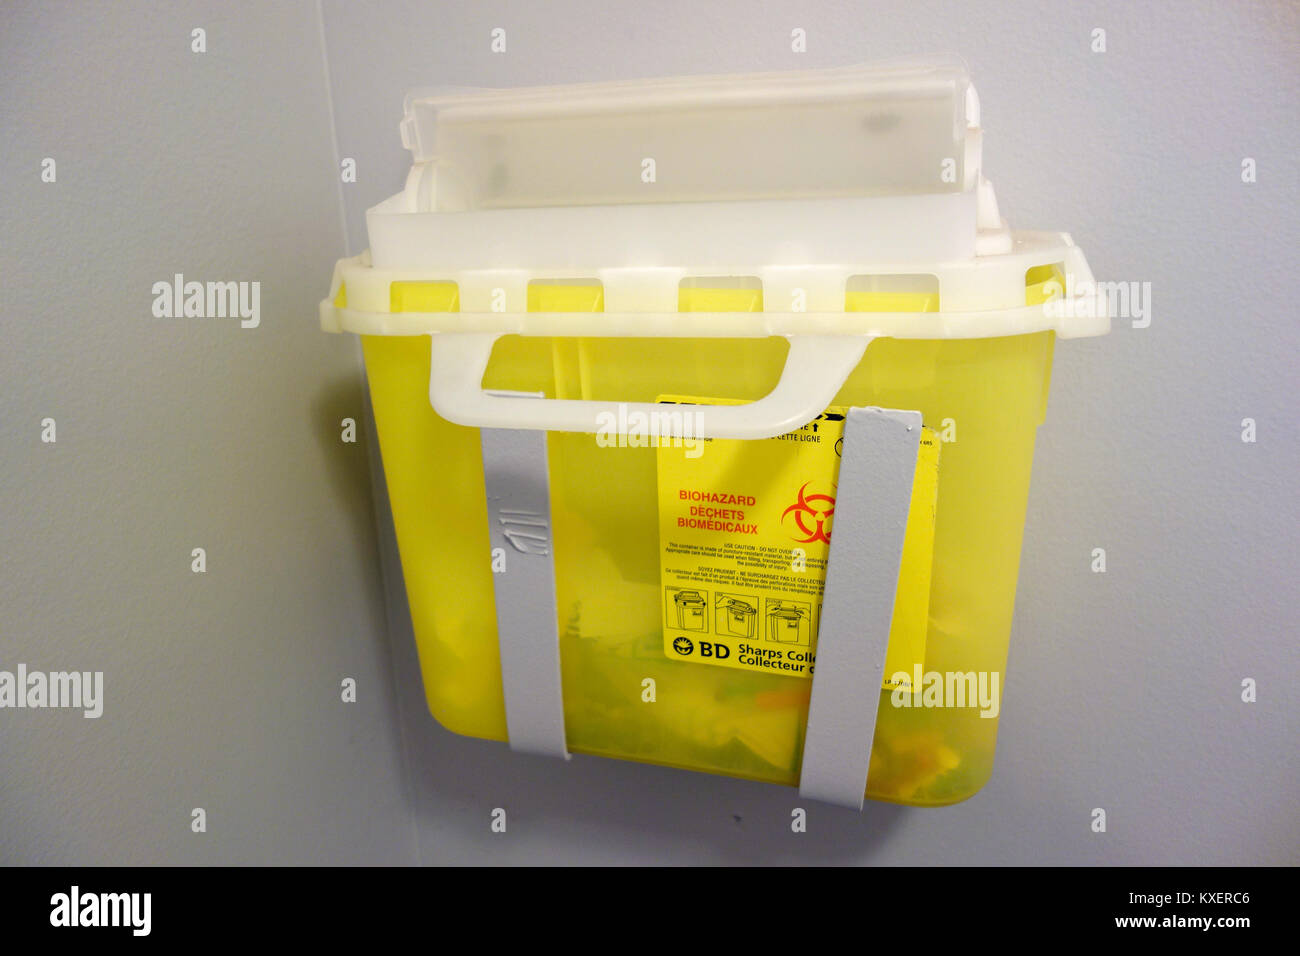 A disposal or collection box for needle sharps in a washroom Stock Photo